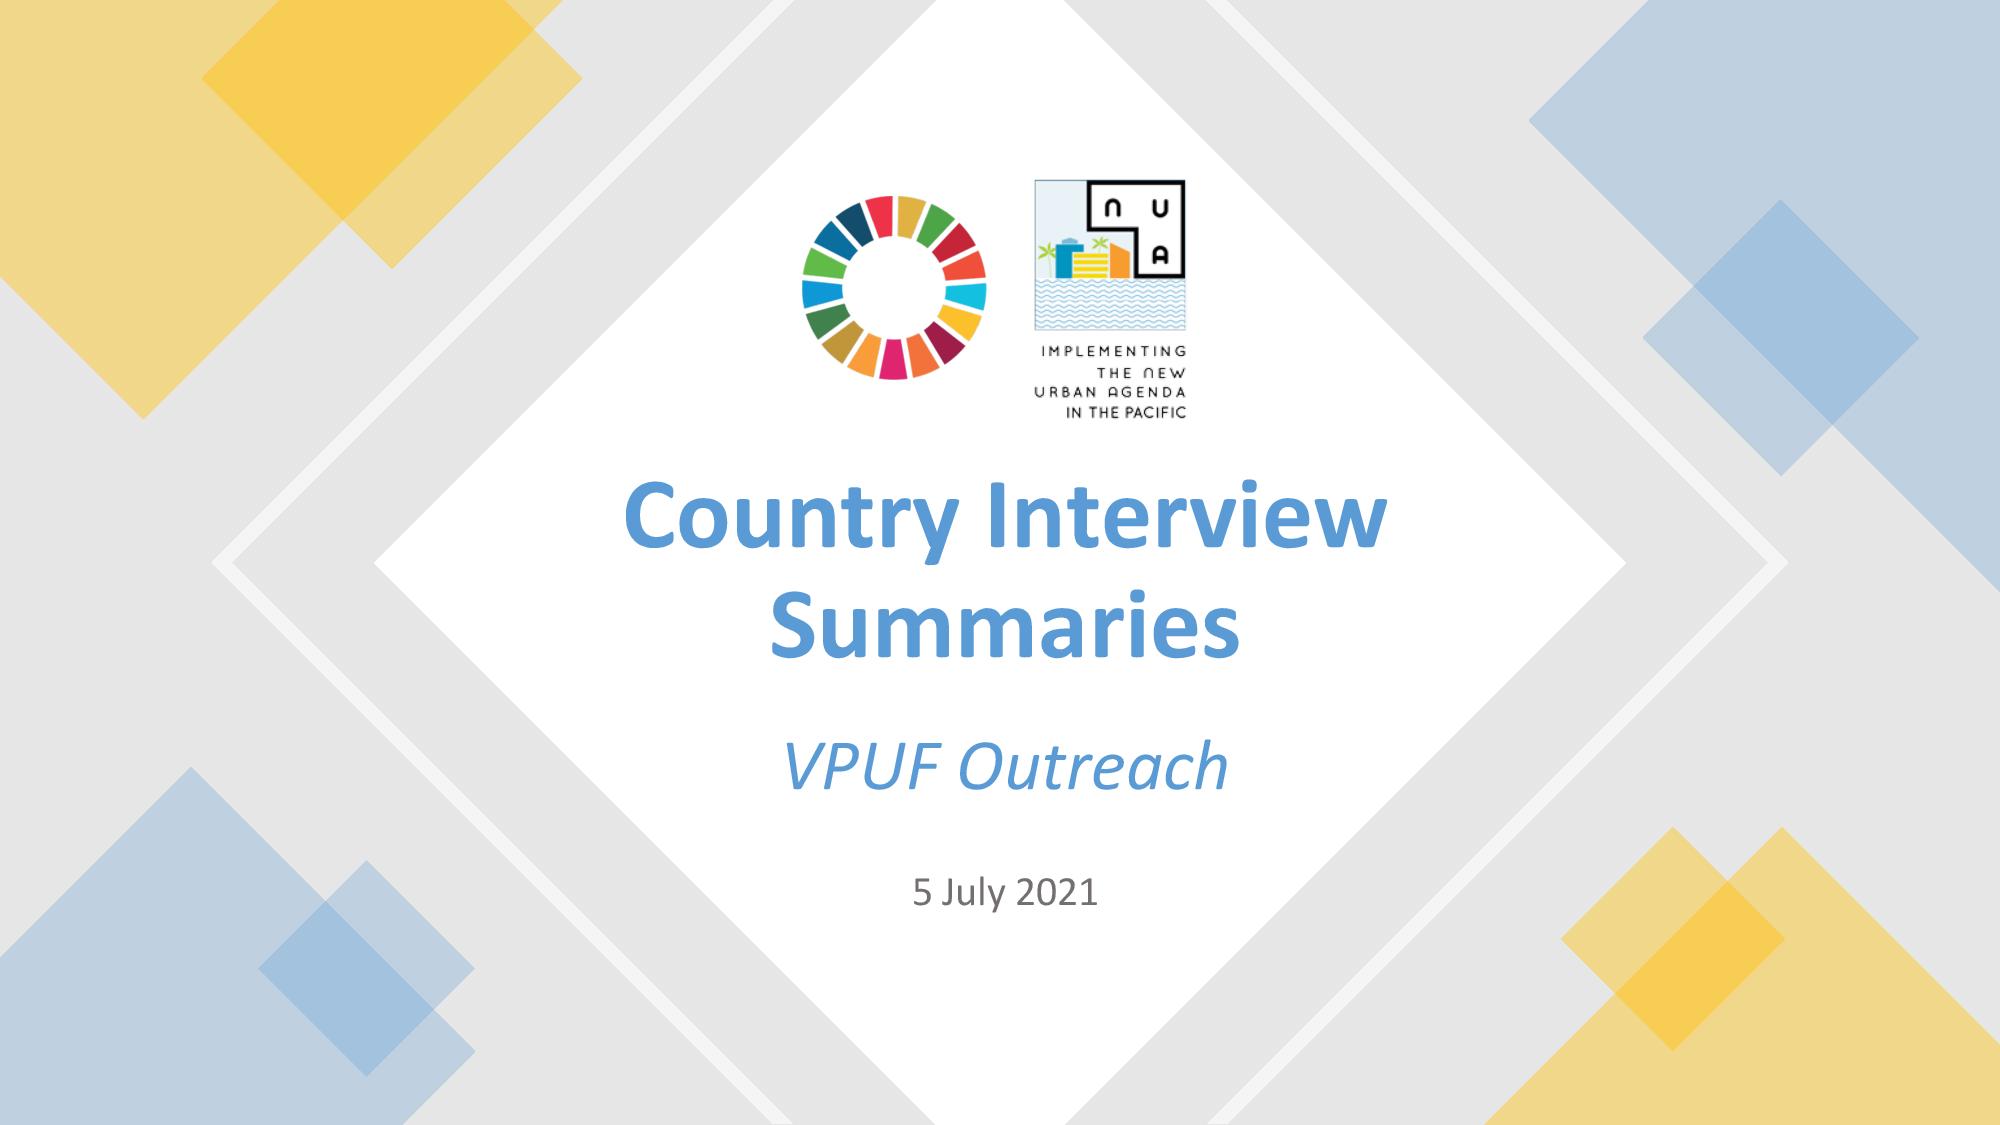 VPUF 2021: PP-NUA Country Interview Summaries